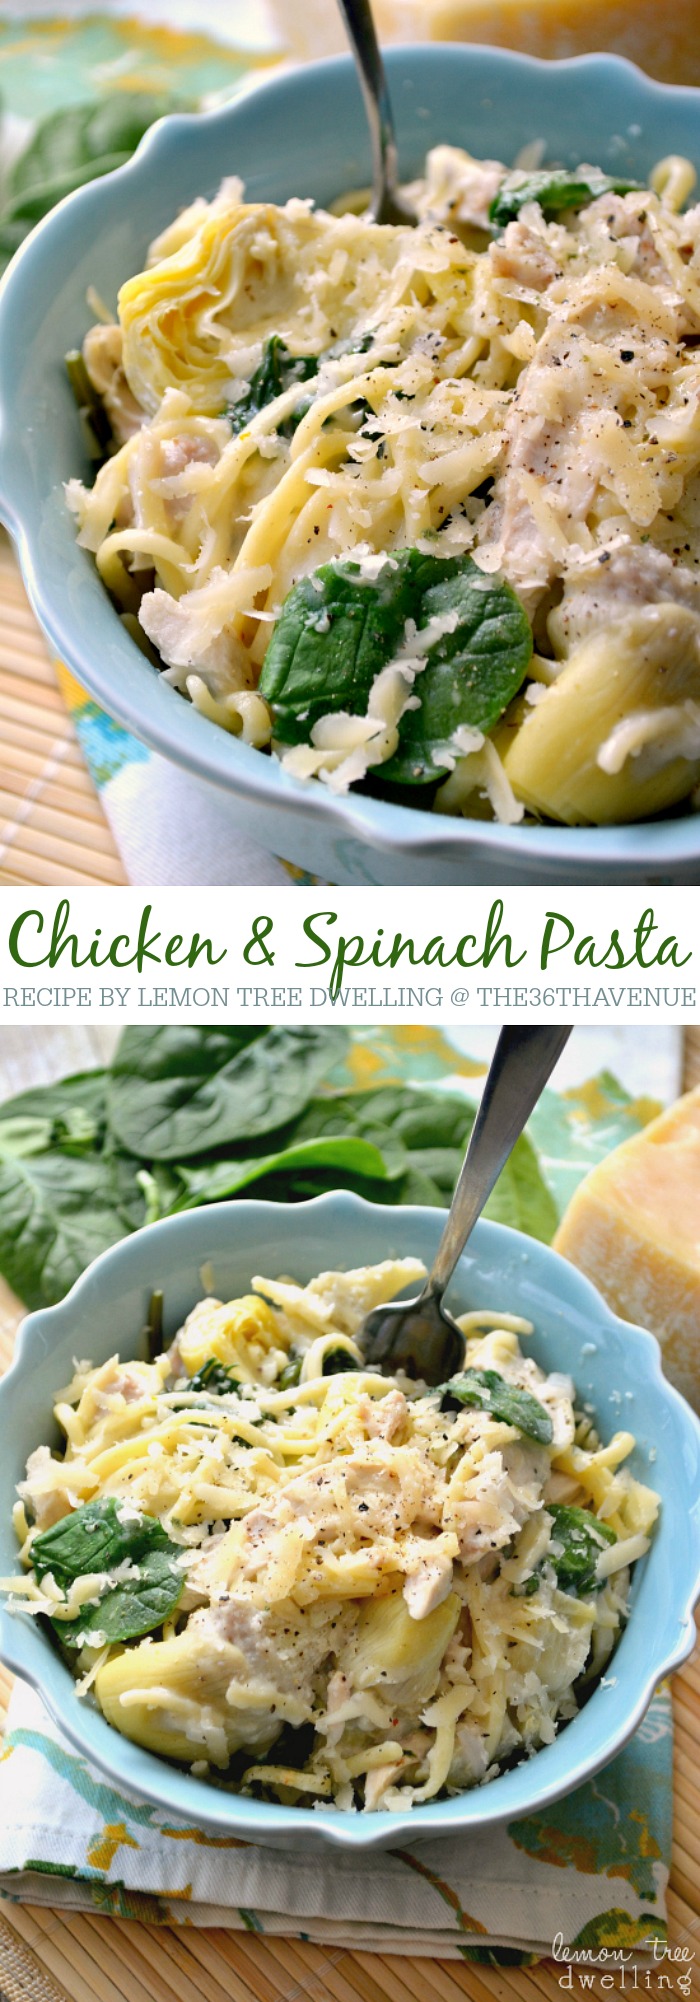 Pasta Recipe - Delicious Chicken Spinach and Artichoke Pasta. It has all the flavors of the spinach artichoke dip you love but without all the heavy cream!